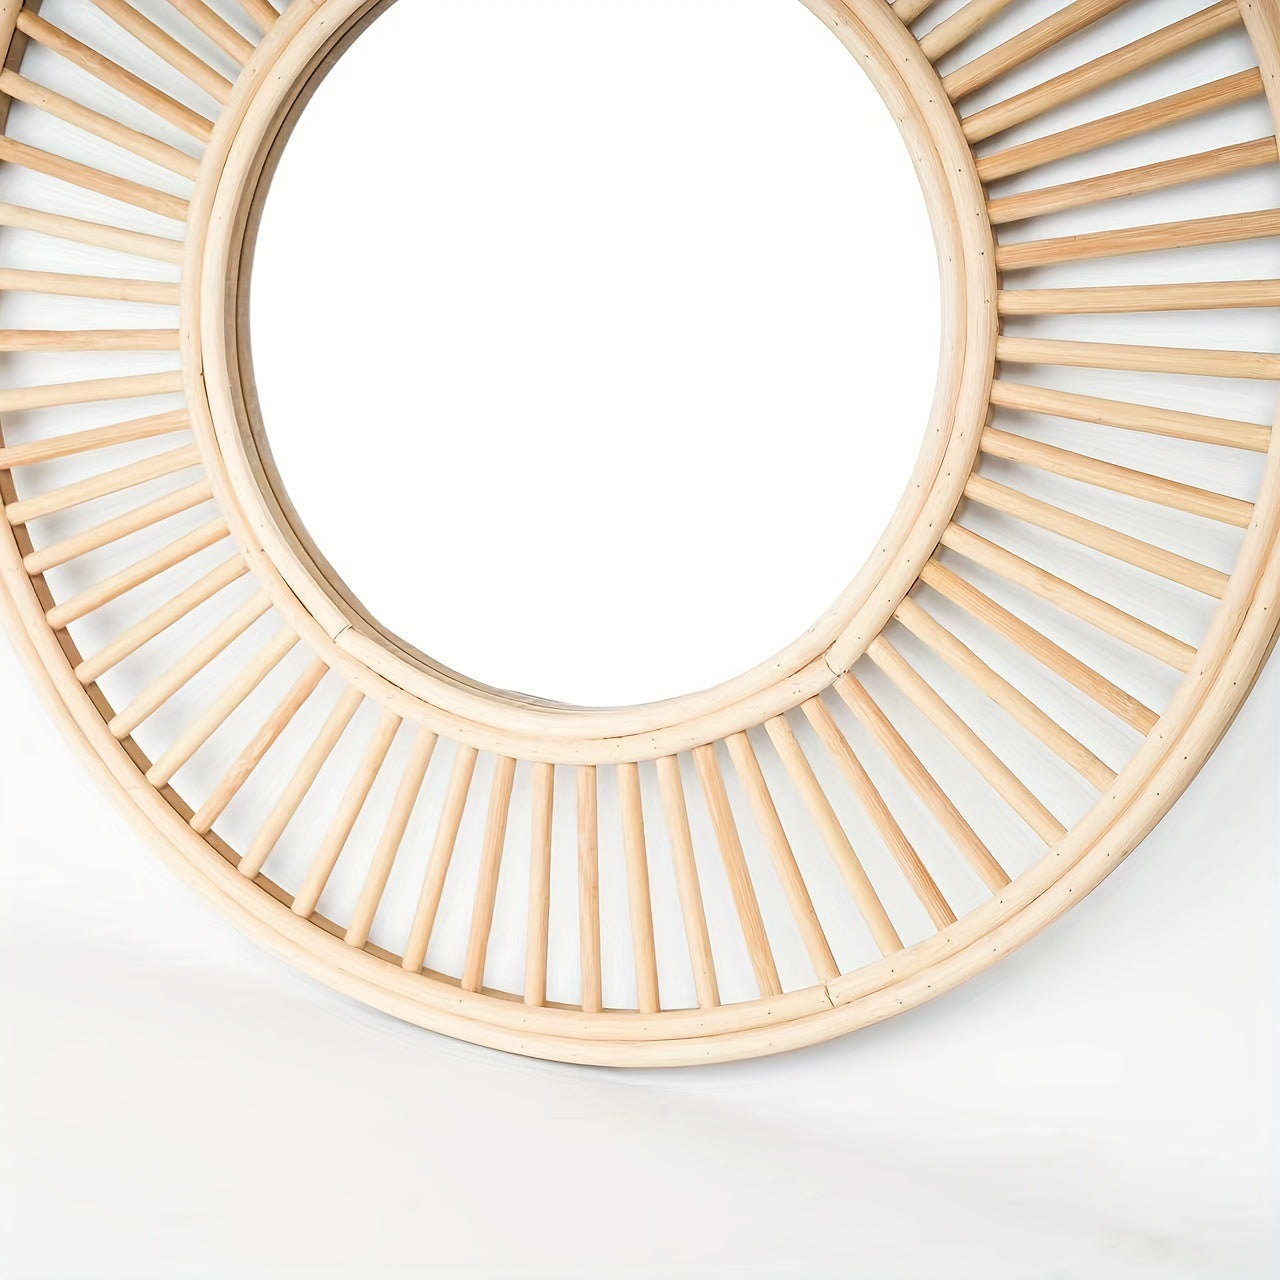 1pc Wooden Wall Mirror, Wall-Mounted Mirror, Vintage Round Mirror, Decorative Mirror For Bathroom, Bedroom, Living Rome, Home Decor